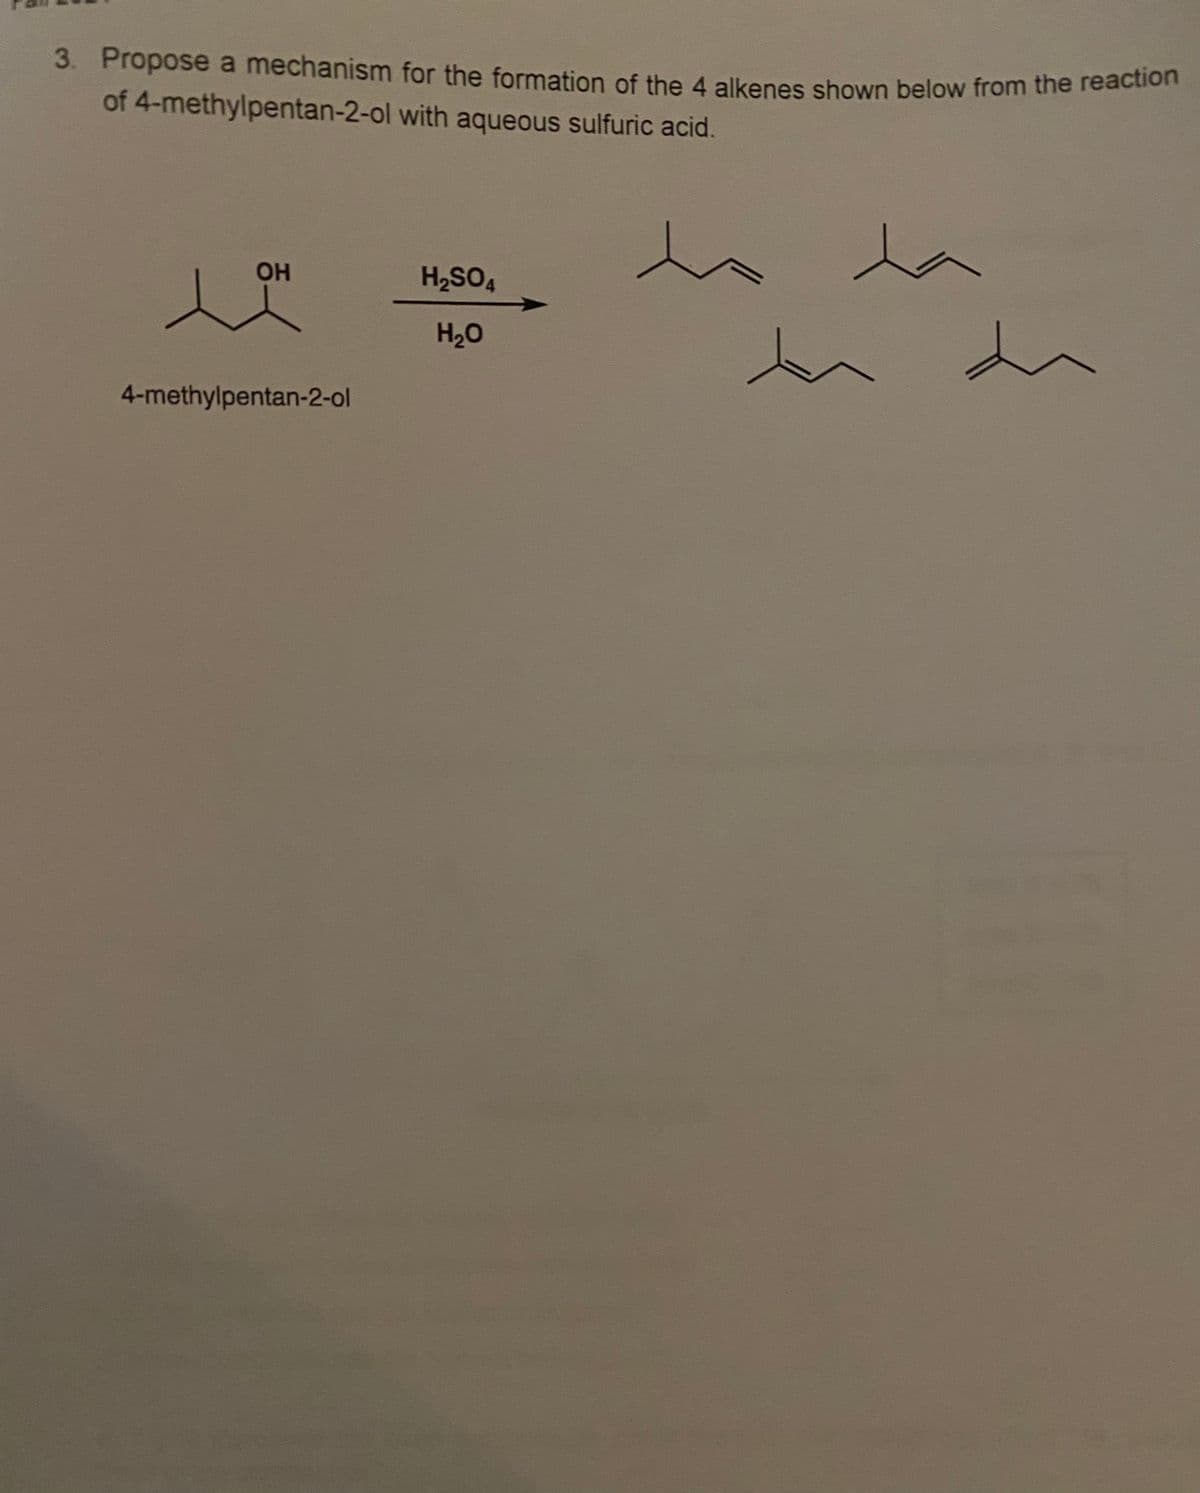 3. Propose a mechanism for the formation of the 4 alkenes shown below from the reaction
3. Propose a mechanism for the formation of the 4 alkenes shown below from the reacion
of 4-methylpentan-2-ol with aqueous sulfuric acid.
la
OH
H,SO4
H20
4-methylpentan-2-ol
